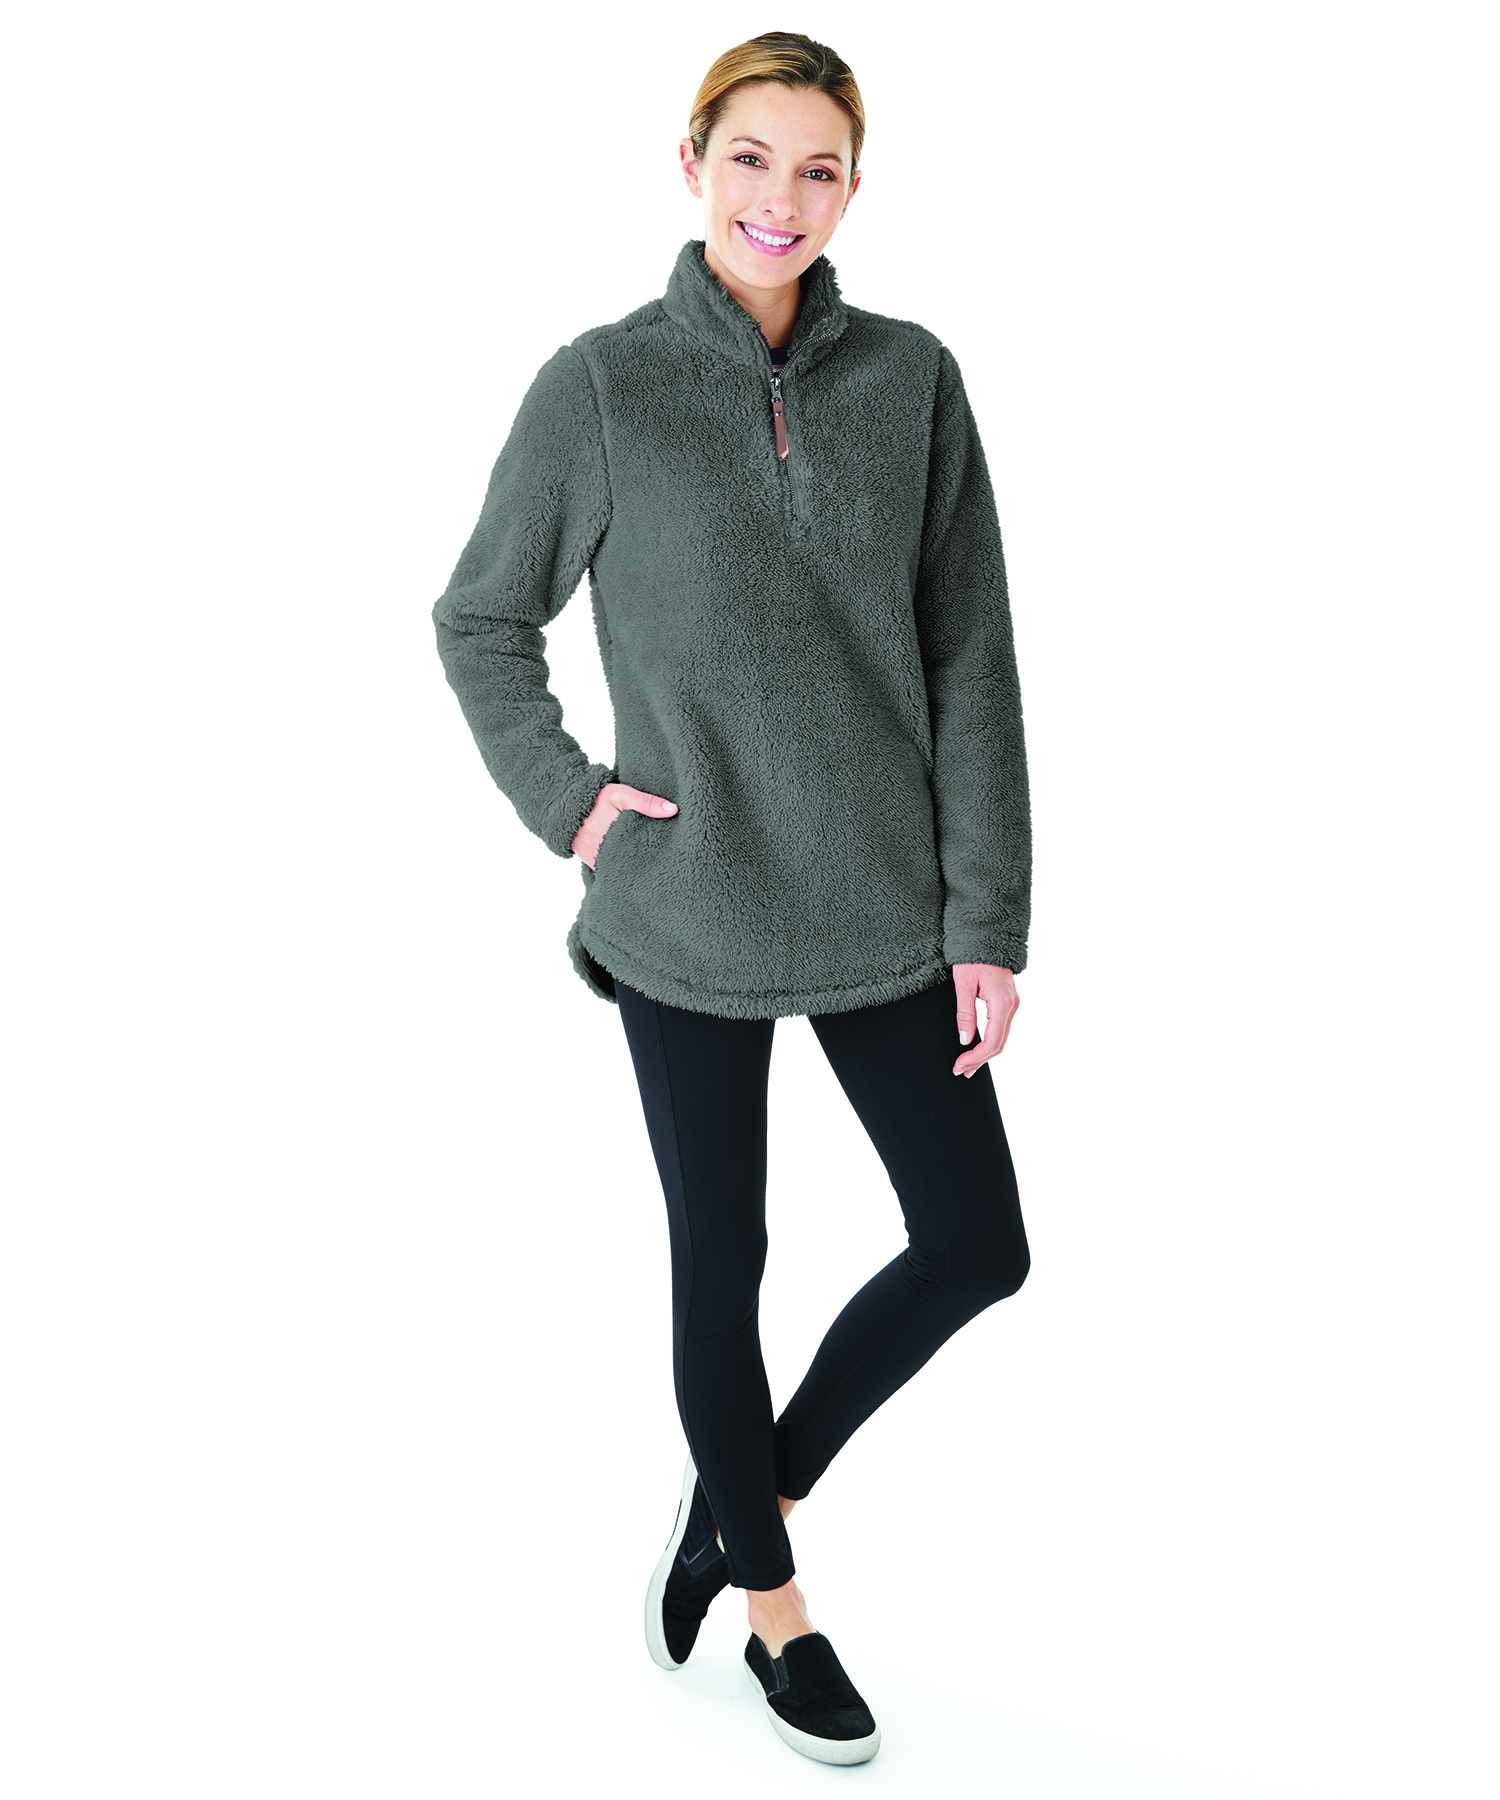 Charles River Apparel Women’s Newport Fleece Pullover Style 5876 Model Charcoal